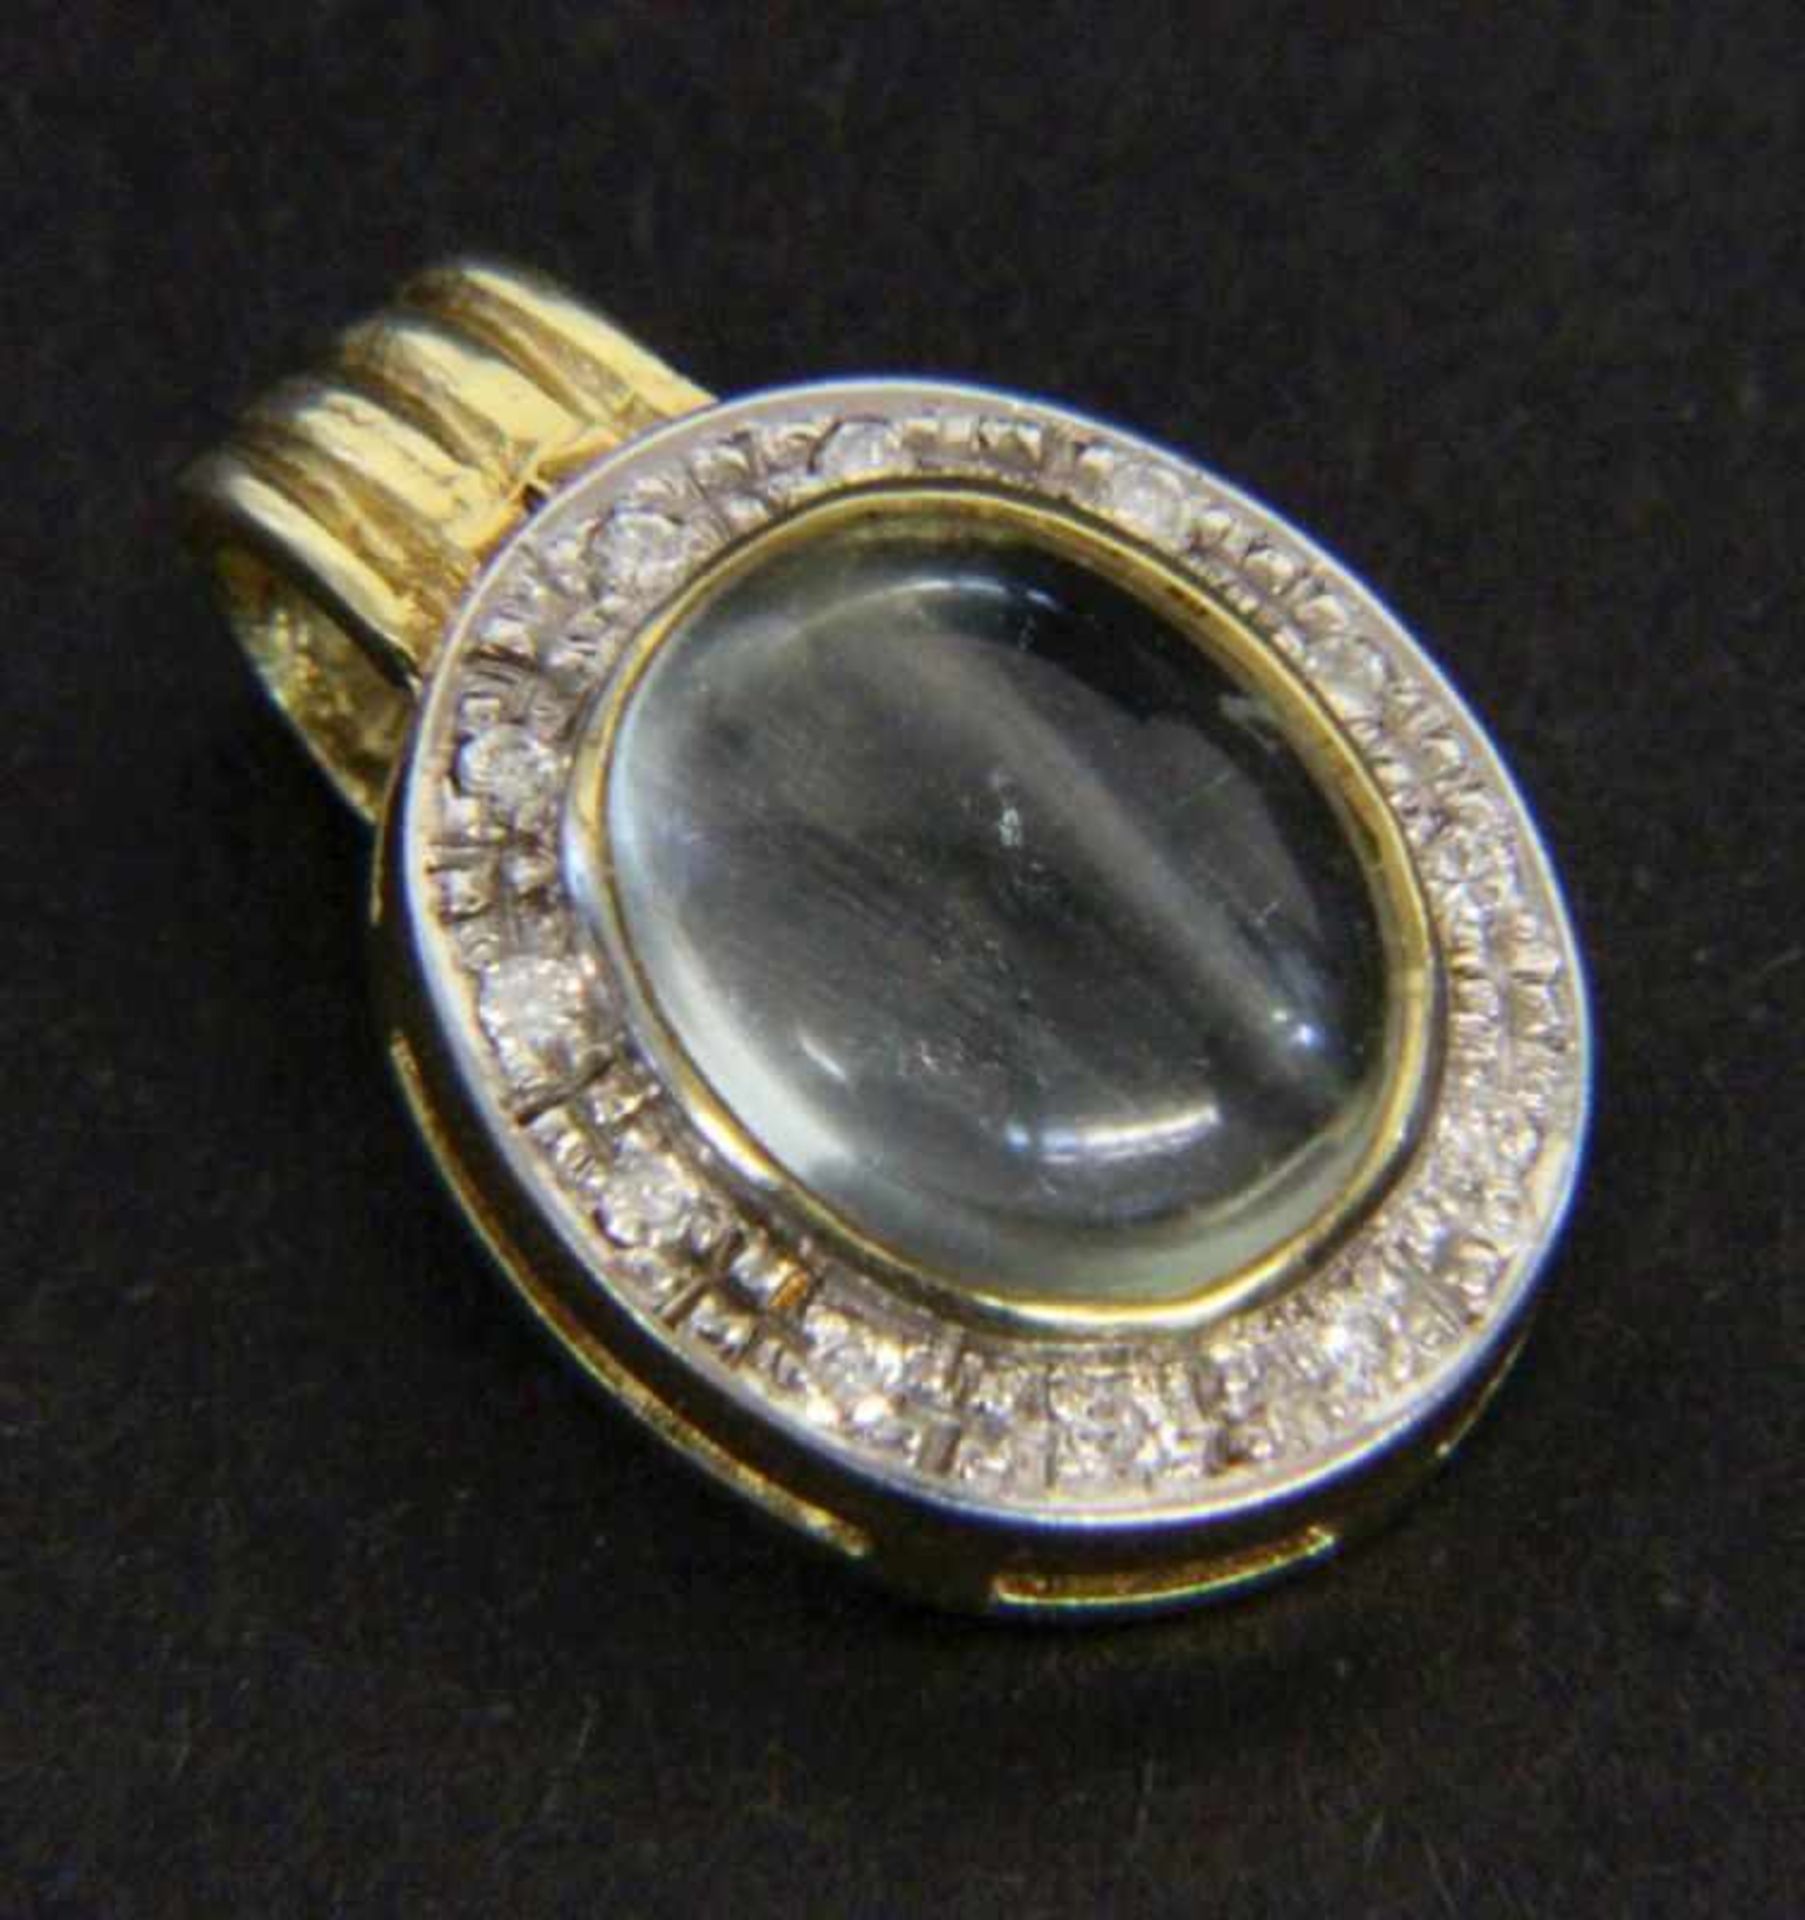 A PENDANT 585/000 yellow gold with moonstone and brilliant cut diamonds. Gross weightapproximately